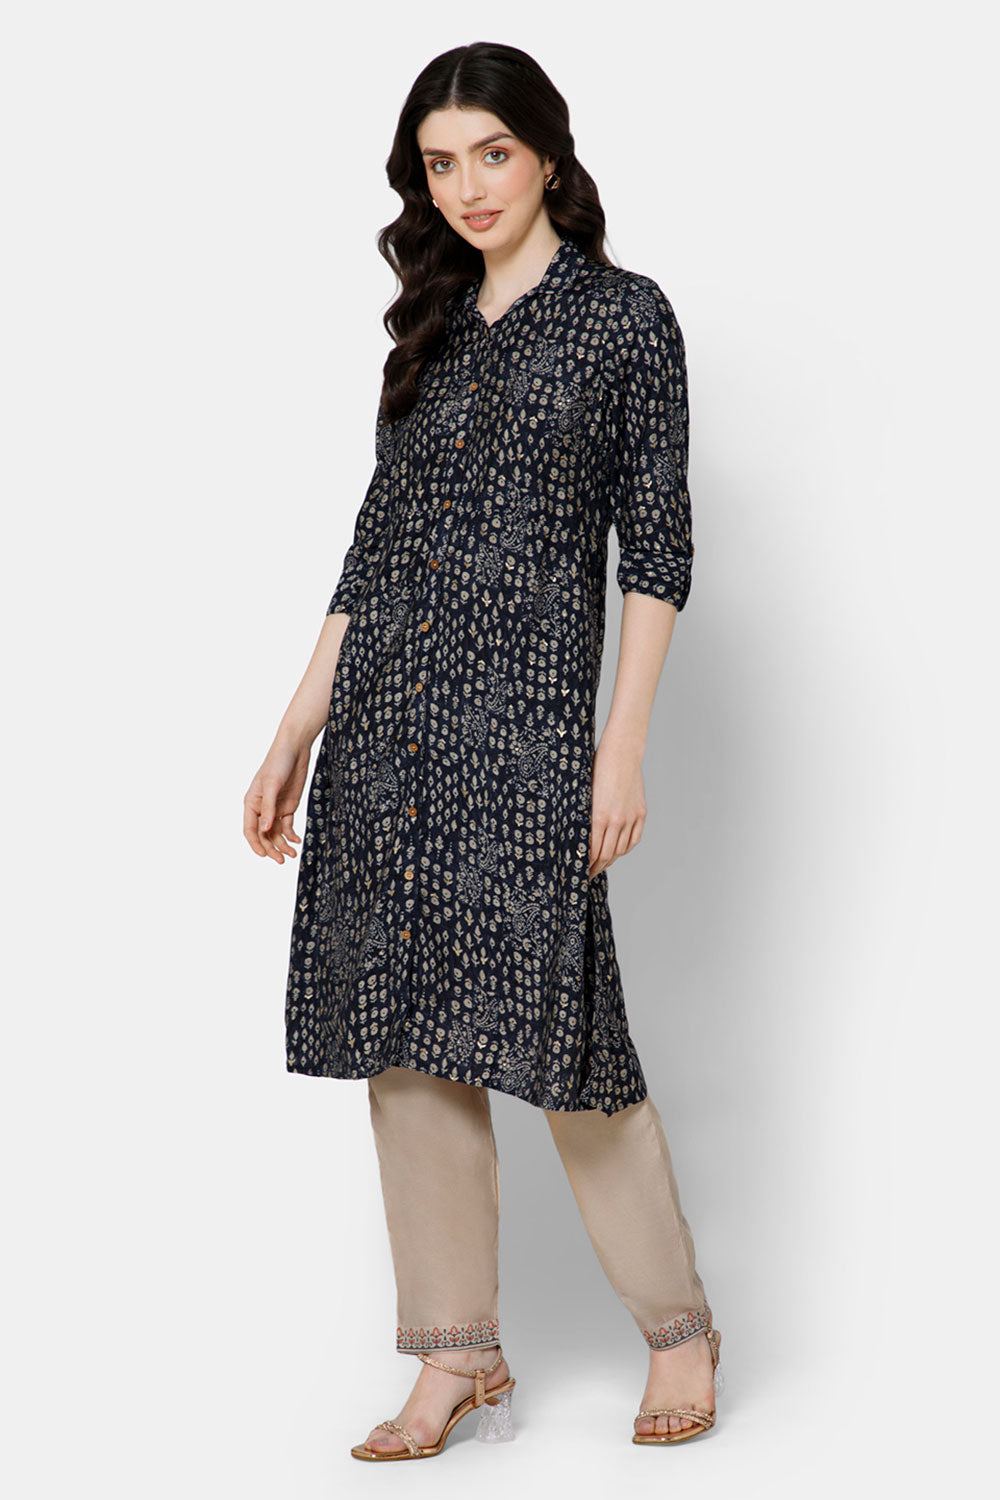 Mythri Women's Fit and Flare Casual Dress - Navy Blue - DR06